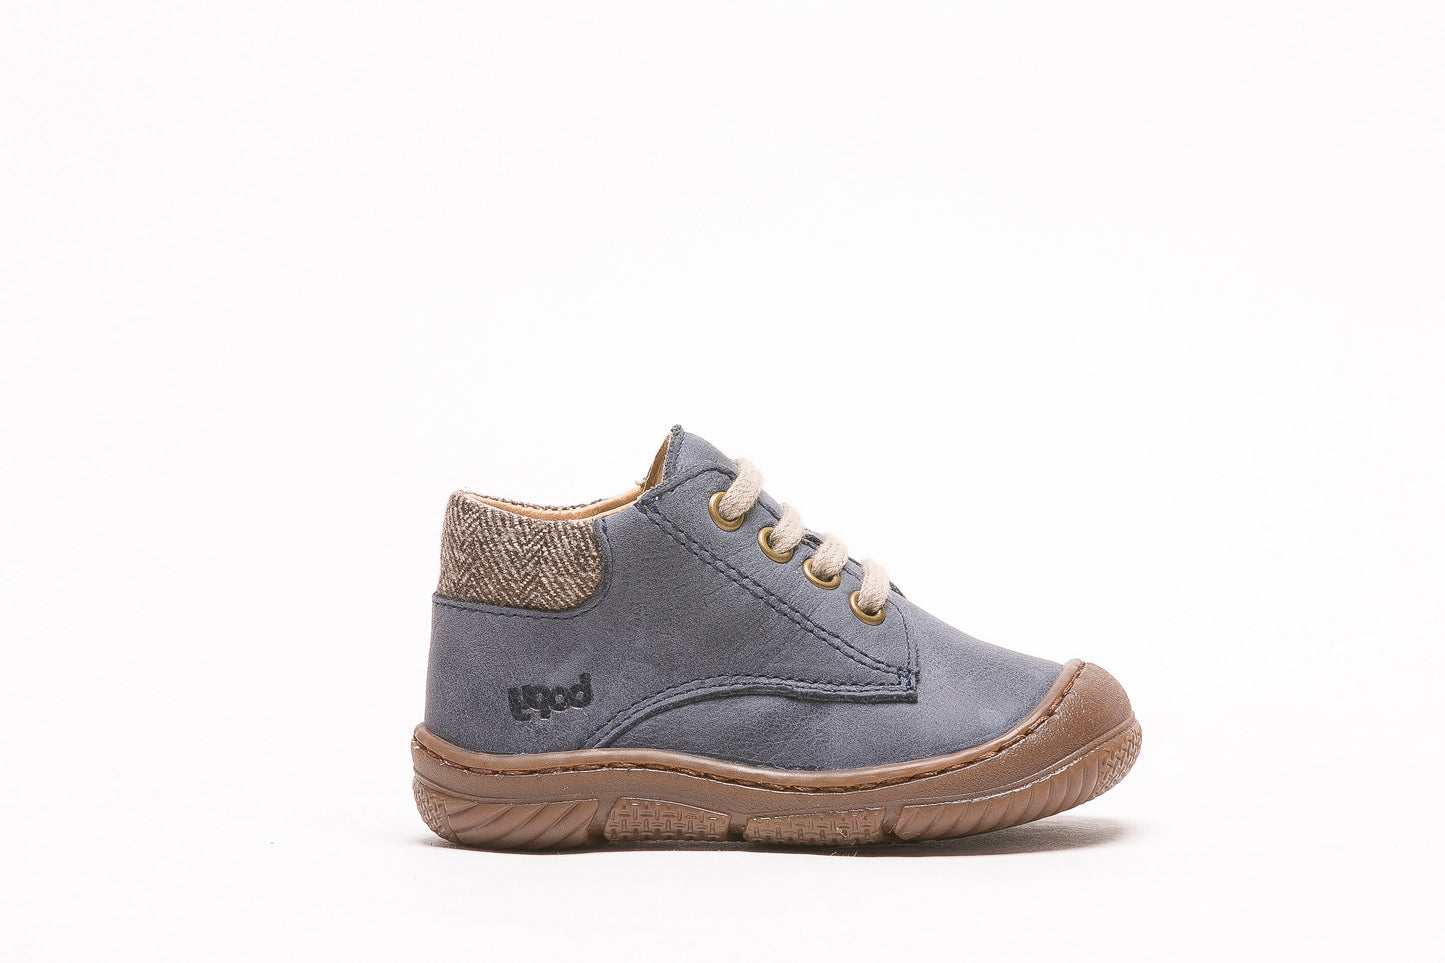 A boys ankle boot by Bopy ,style Jazo, in marine blue with lace and side zip fastening. Right side view.